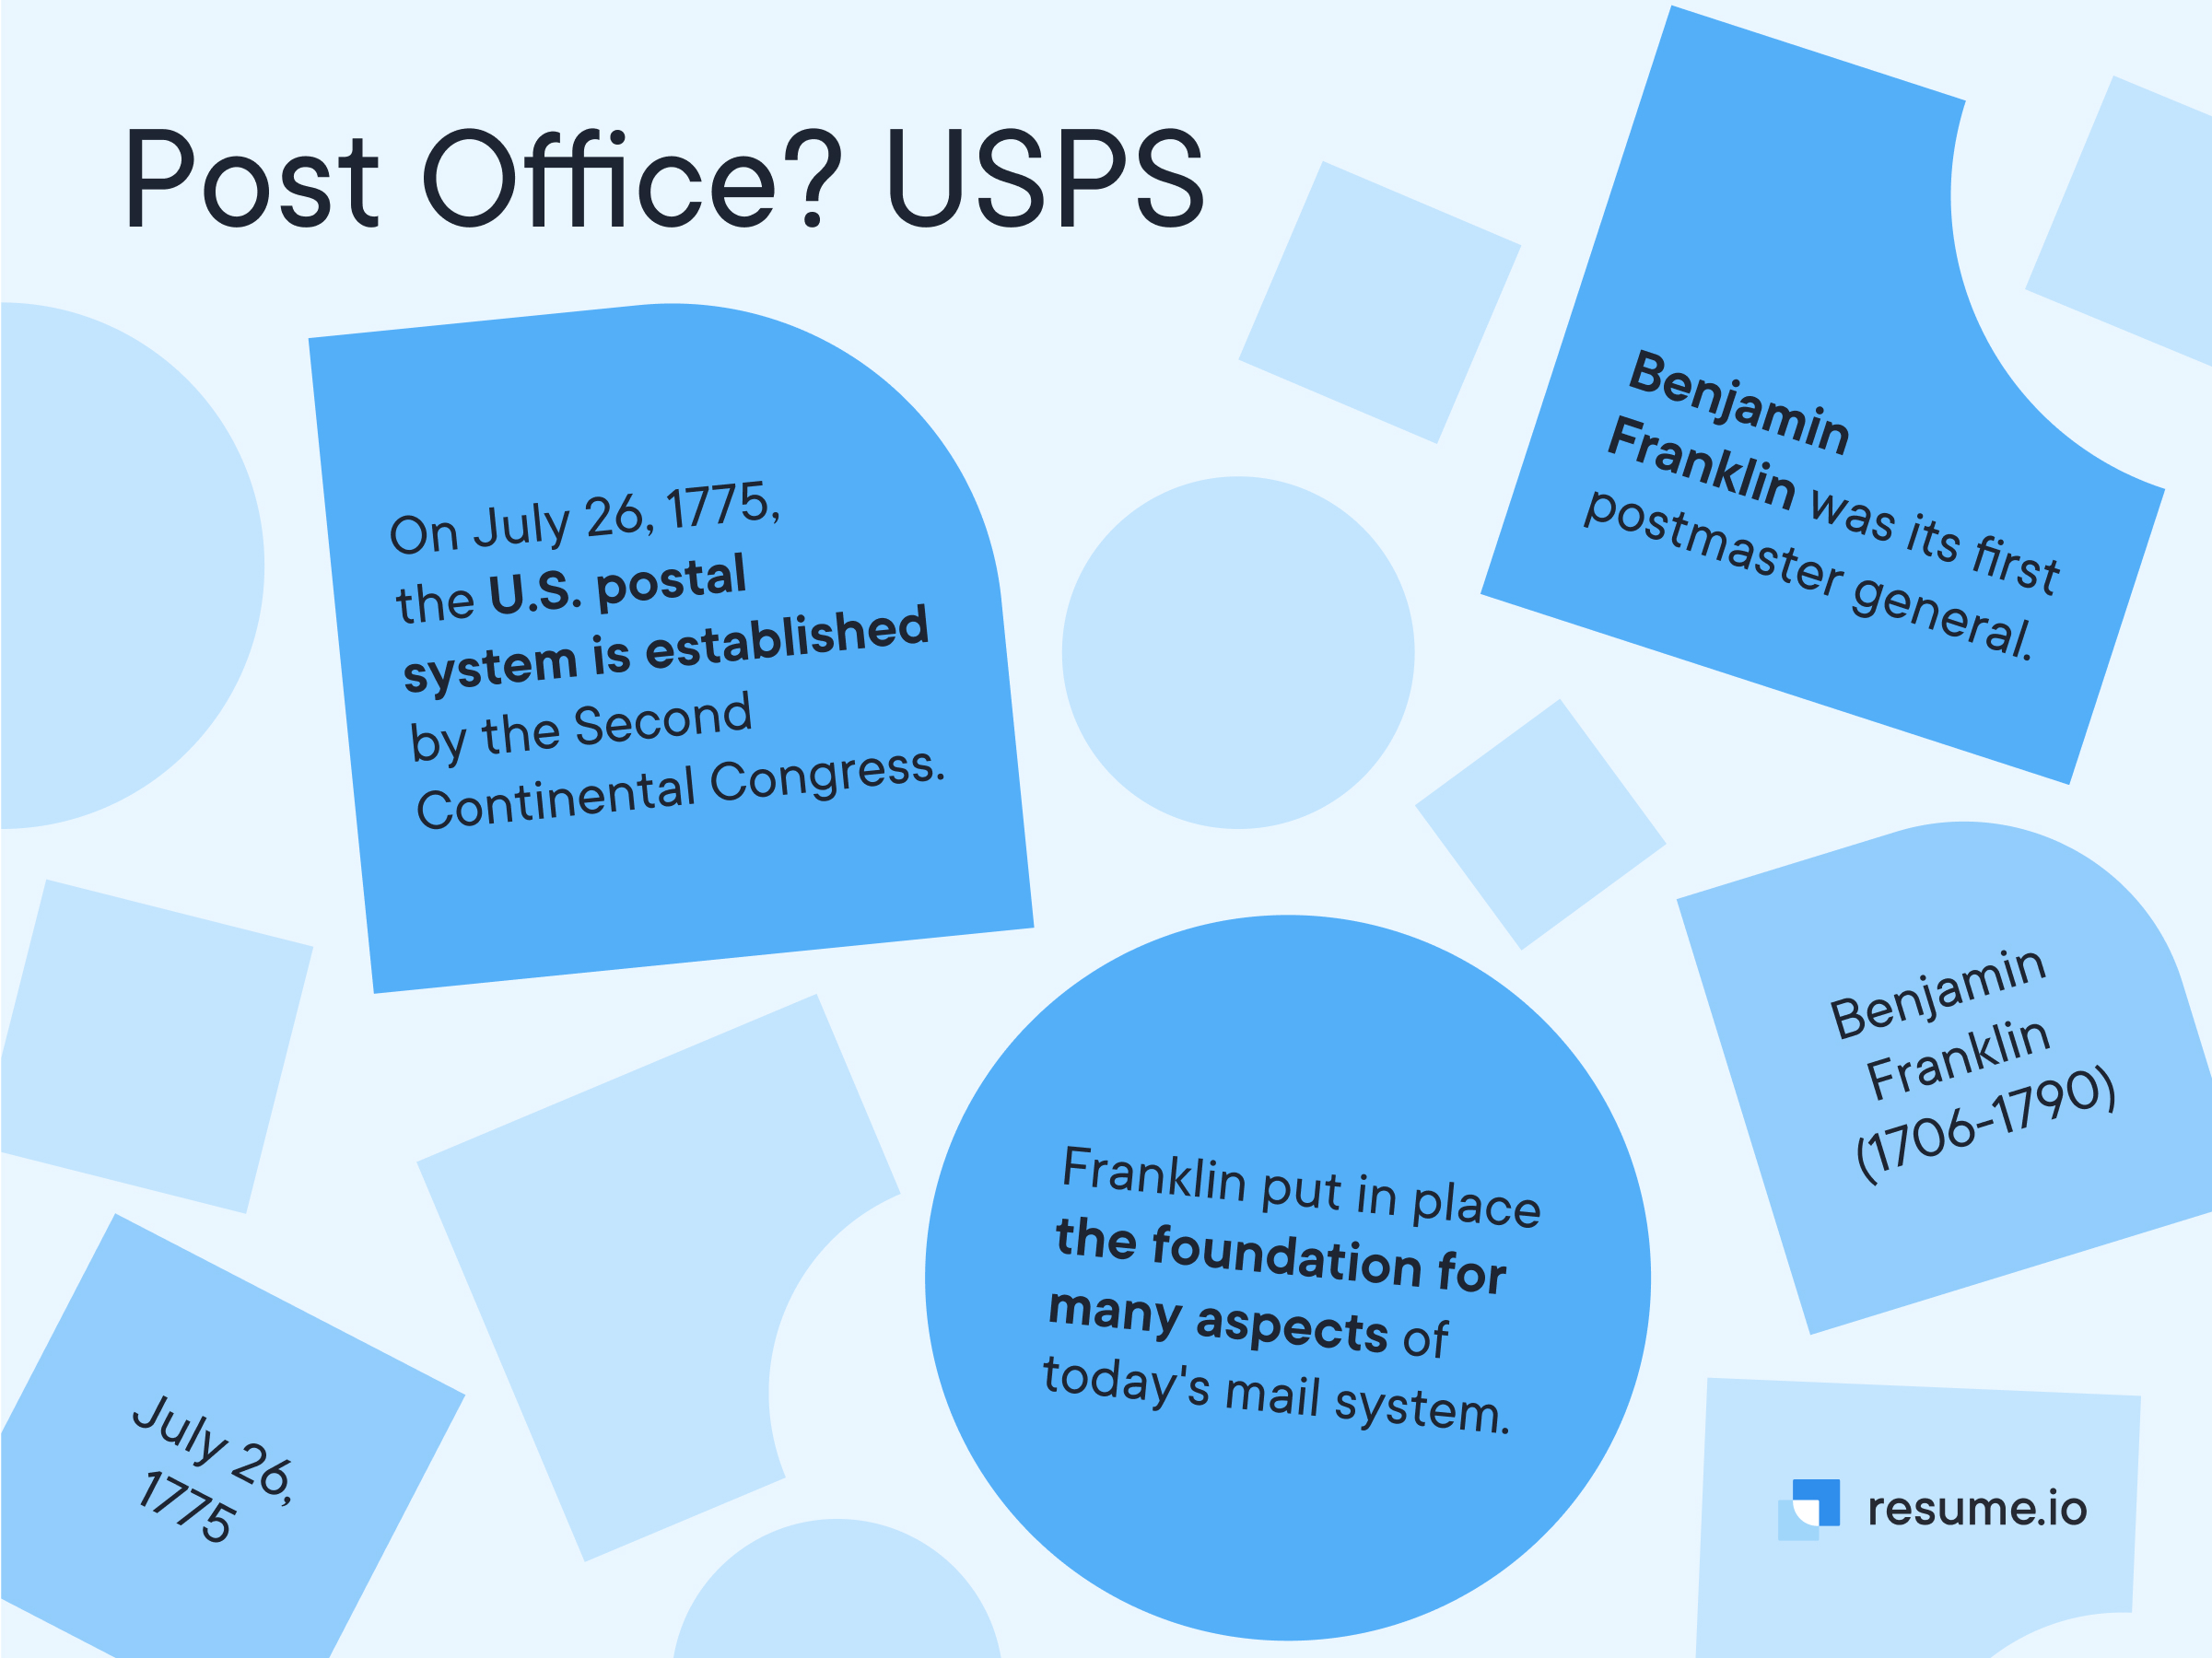 Facts about Post Office